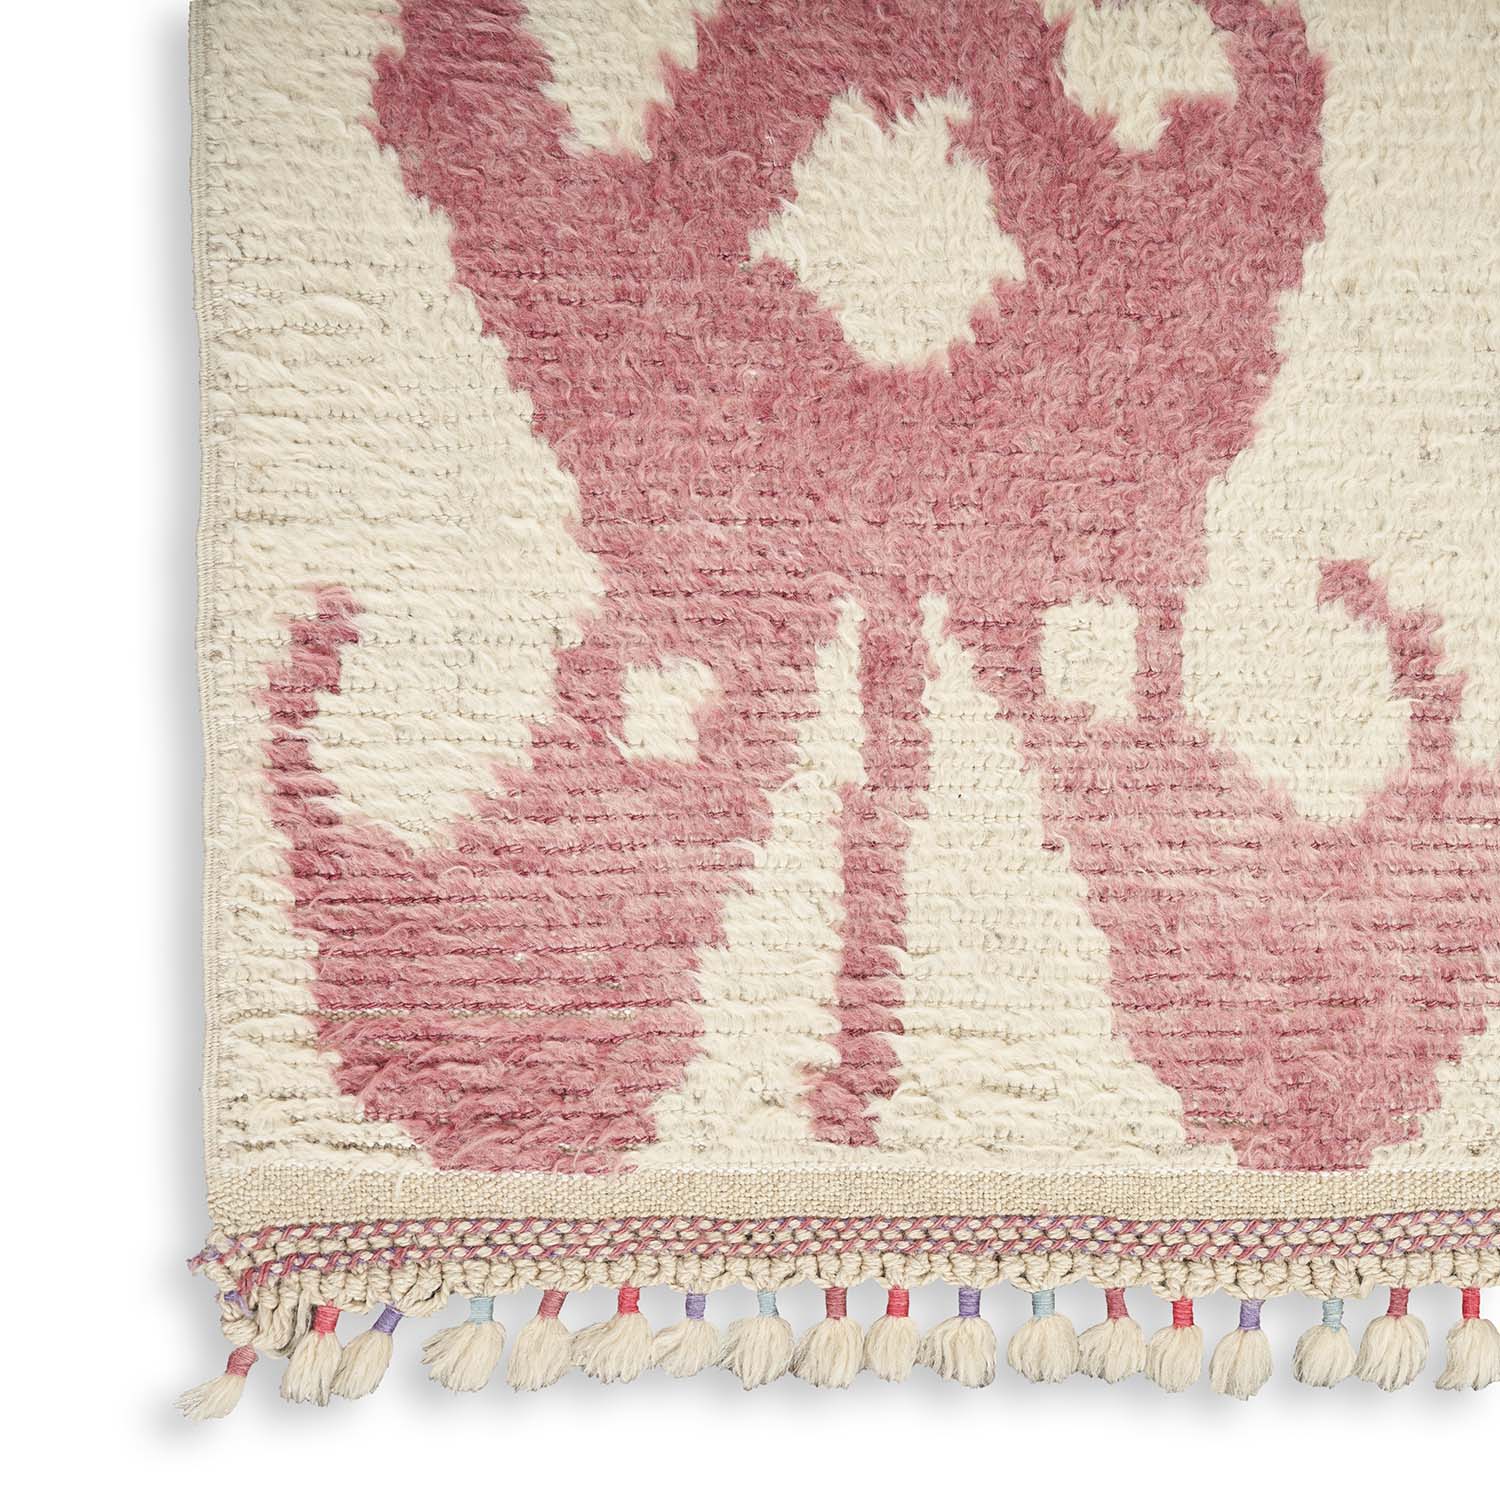 Close-up of a tufted textile rug with pink abstract design